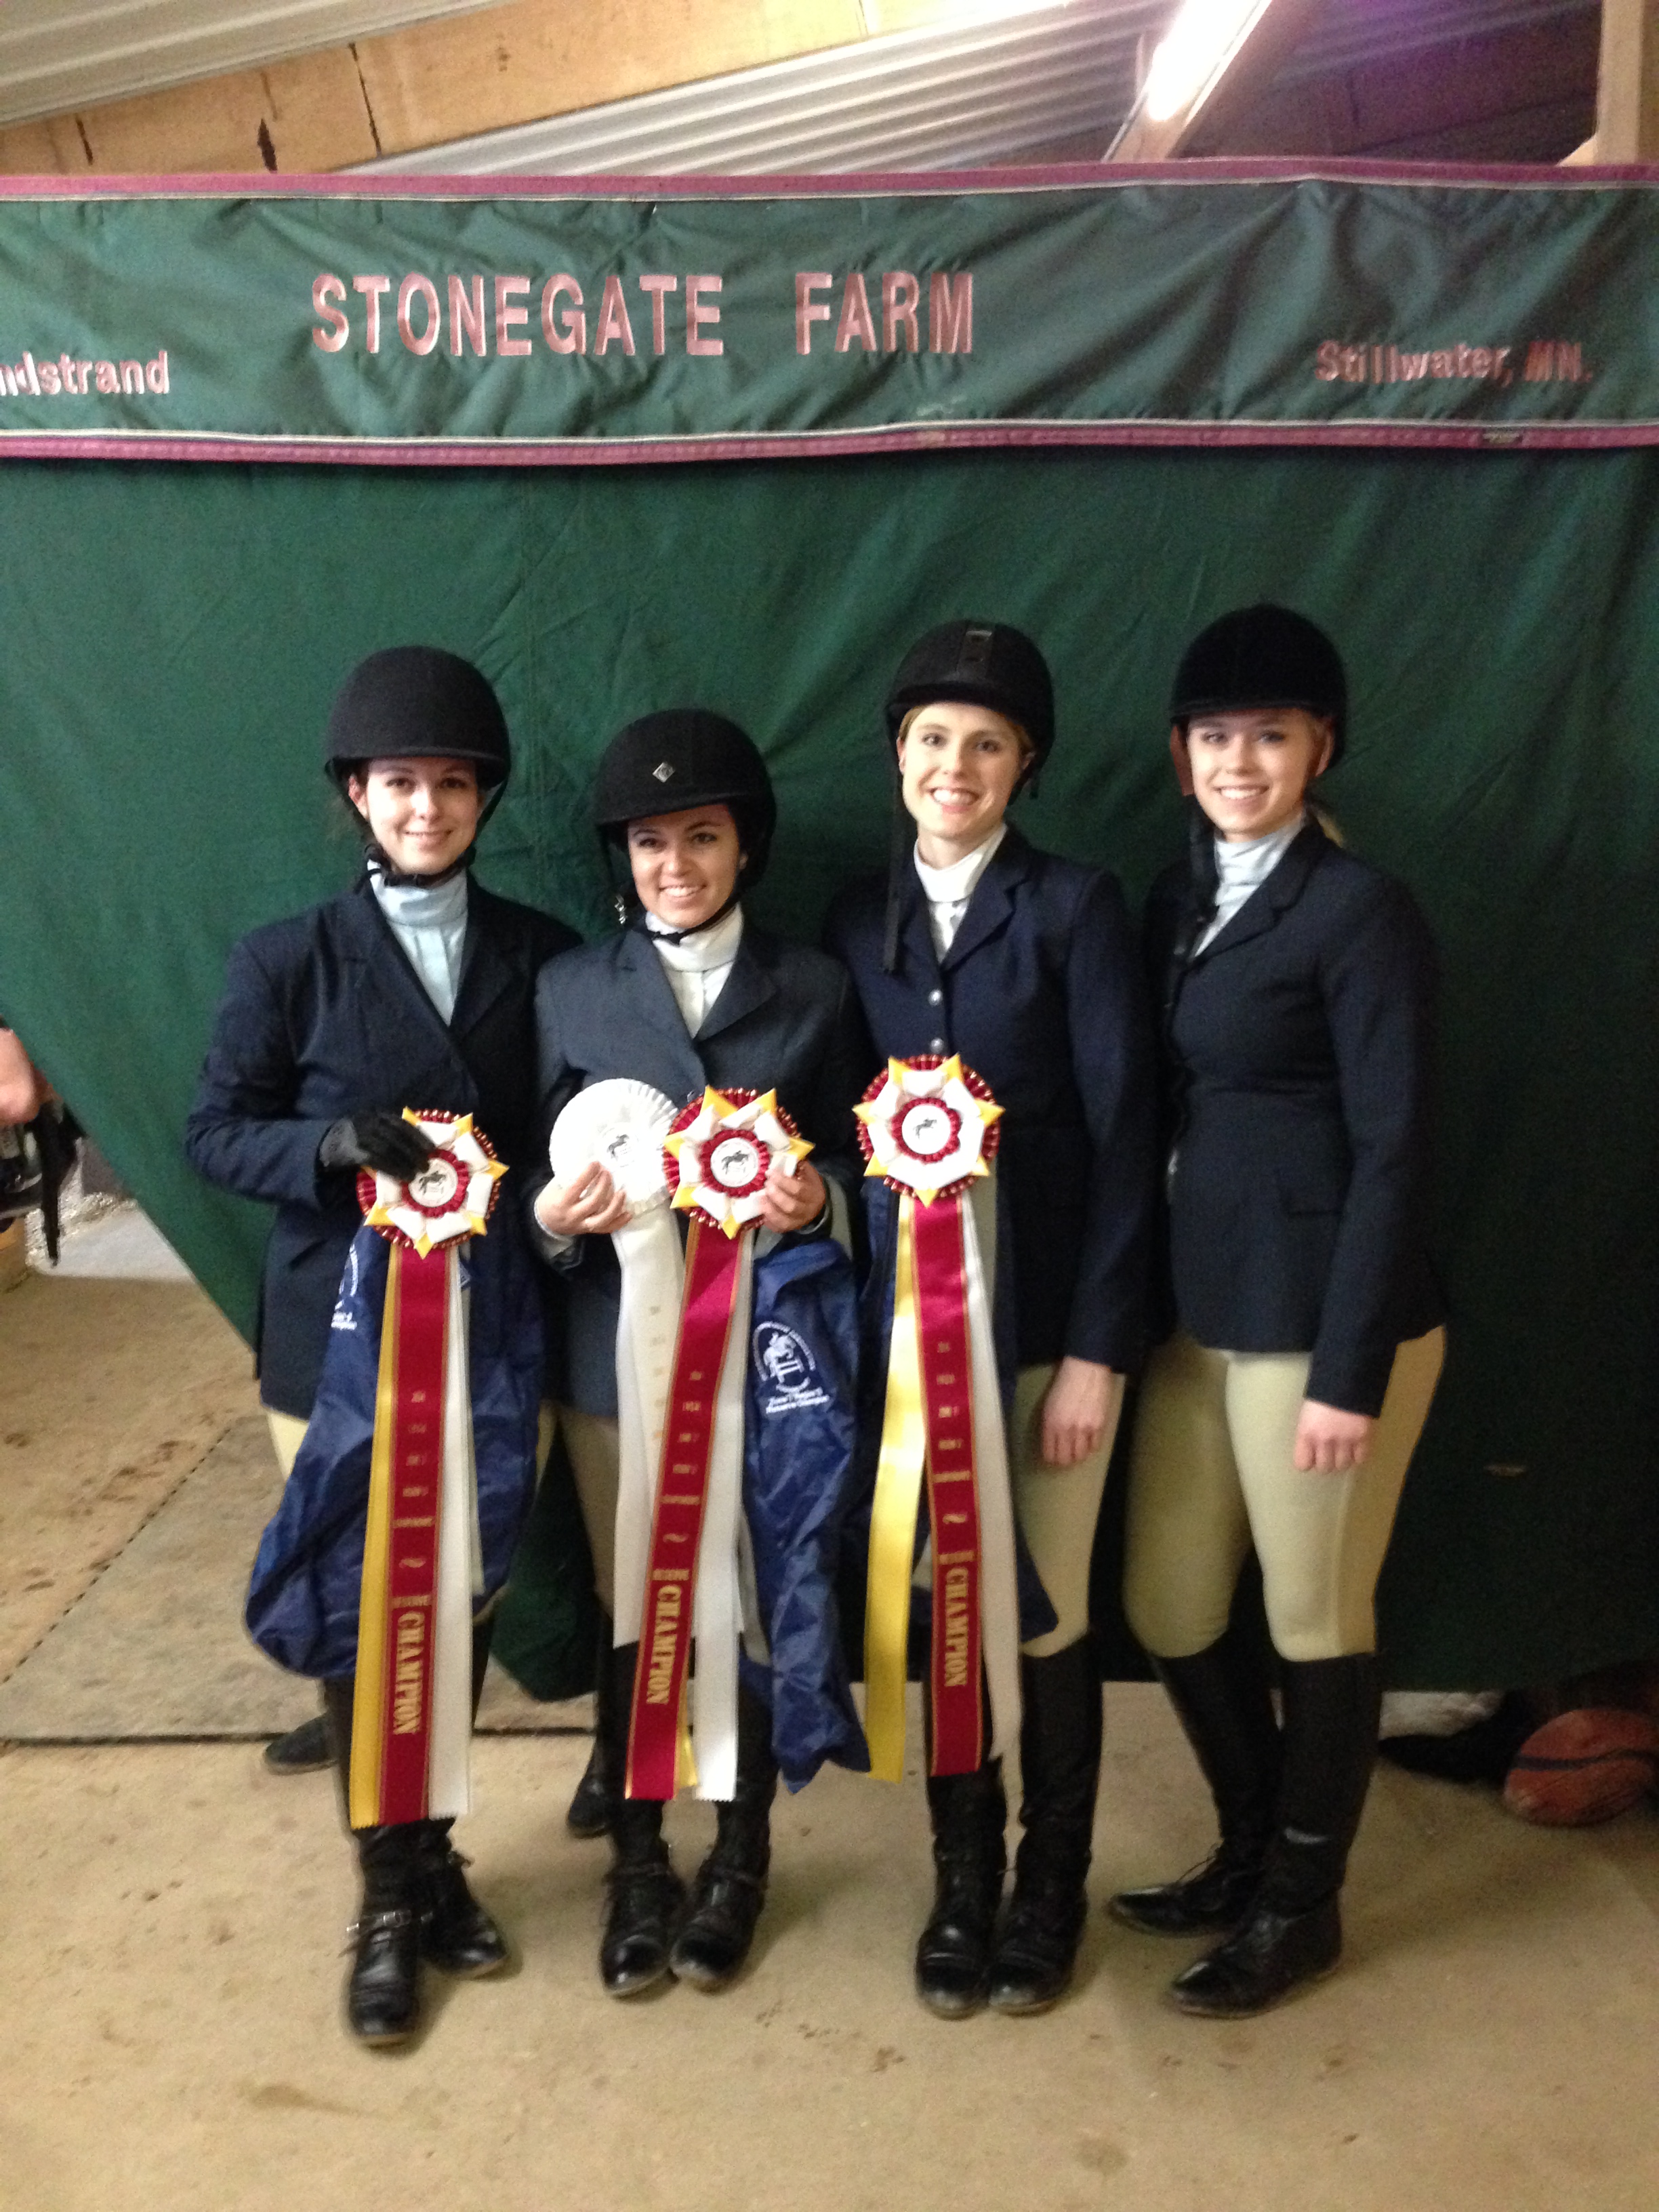 Four members of NDSU's hunt seat equestrian team competed in the Intercollegiate Horse Show Association's Zone 7, Region 3, horse show in Stillwater, Minn., in February. They are, from left, Deann Berntson, Sarah Bridge, Kaylin Scarberry and Sydney Larson. Berntson, Bridge and Scarberry are advancing to competition in Madison, Wis., in April.